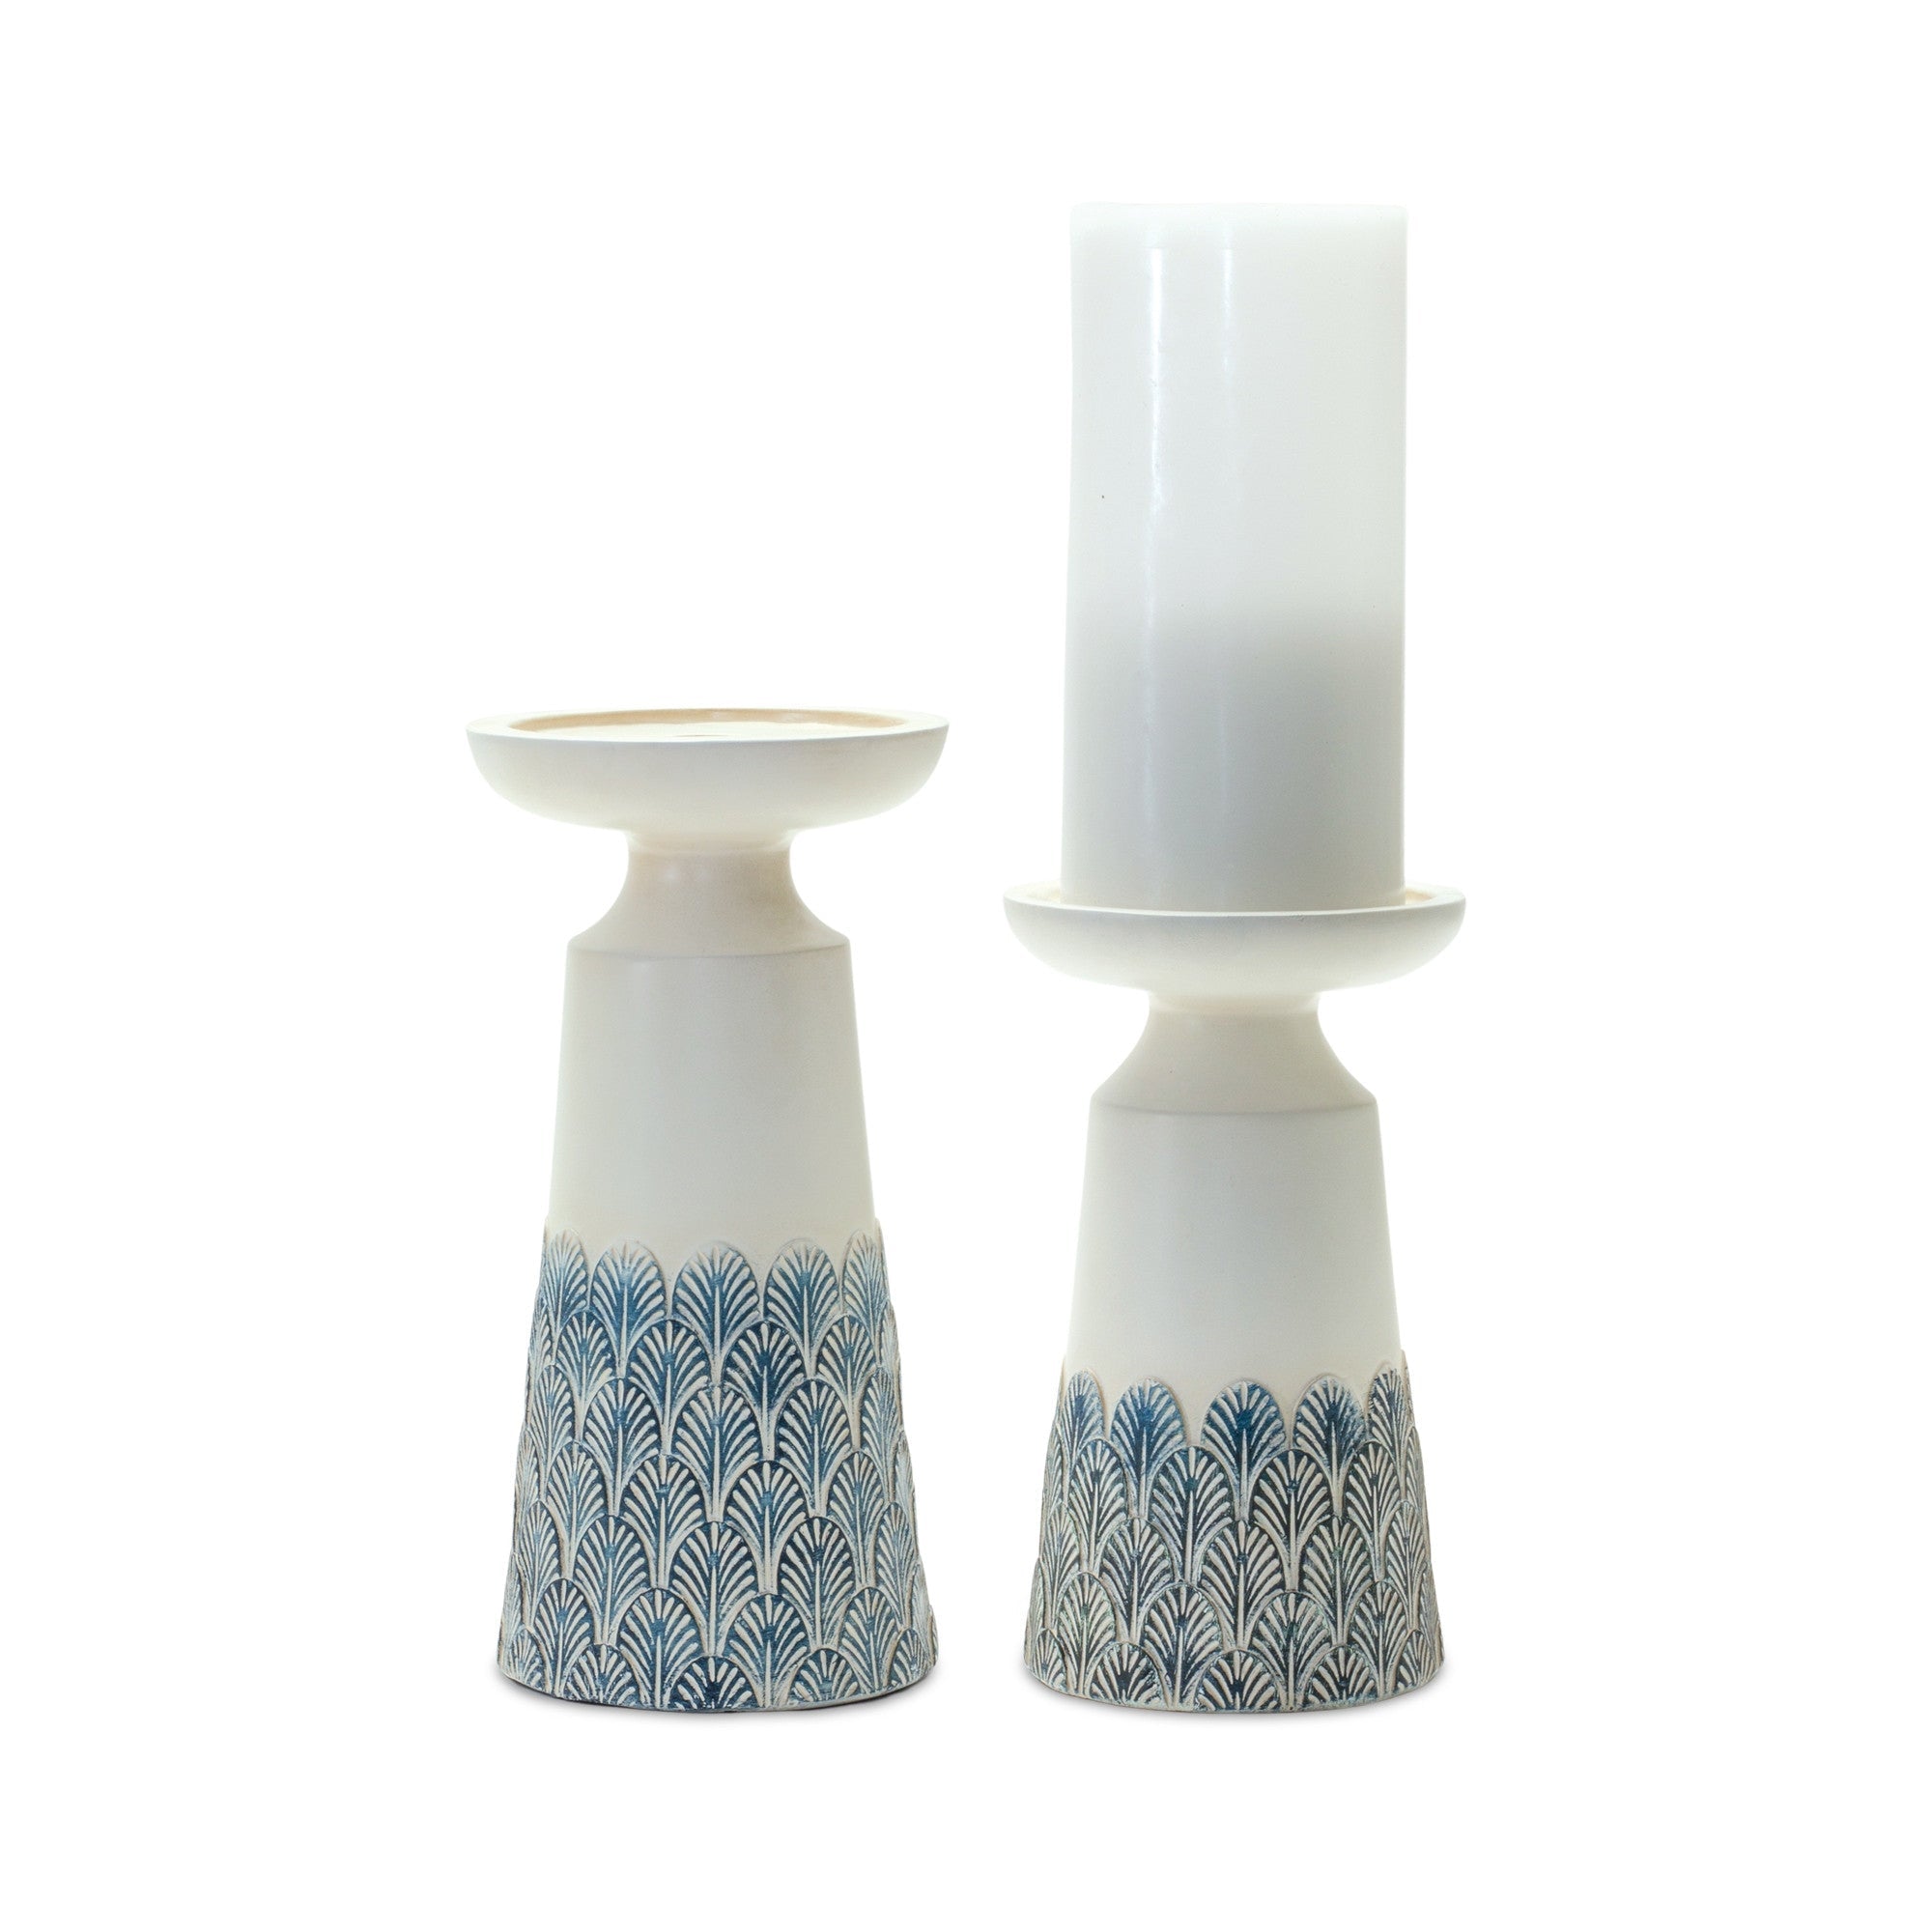 Set-of-Two-White-and-Blue-Tabletop-Pillar-Candle-Holders-Candle-Holders